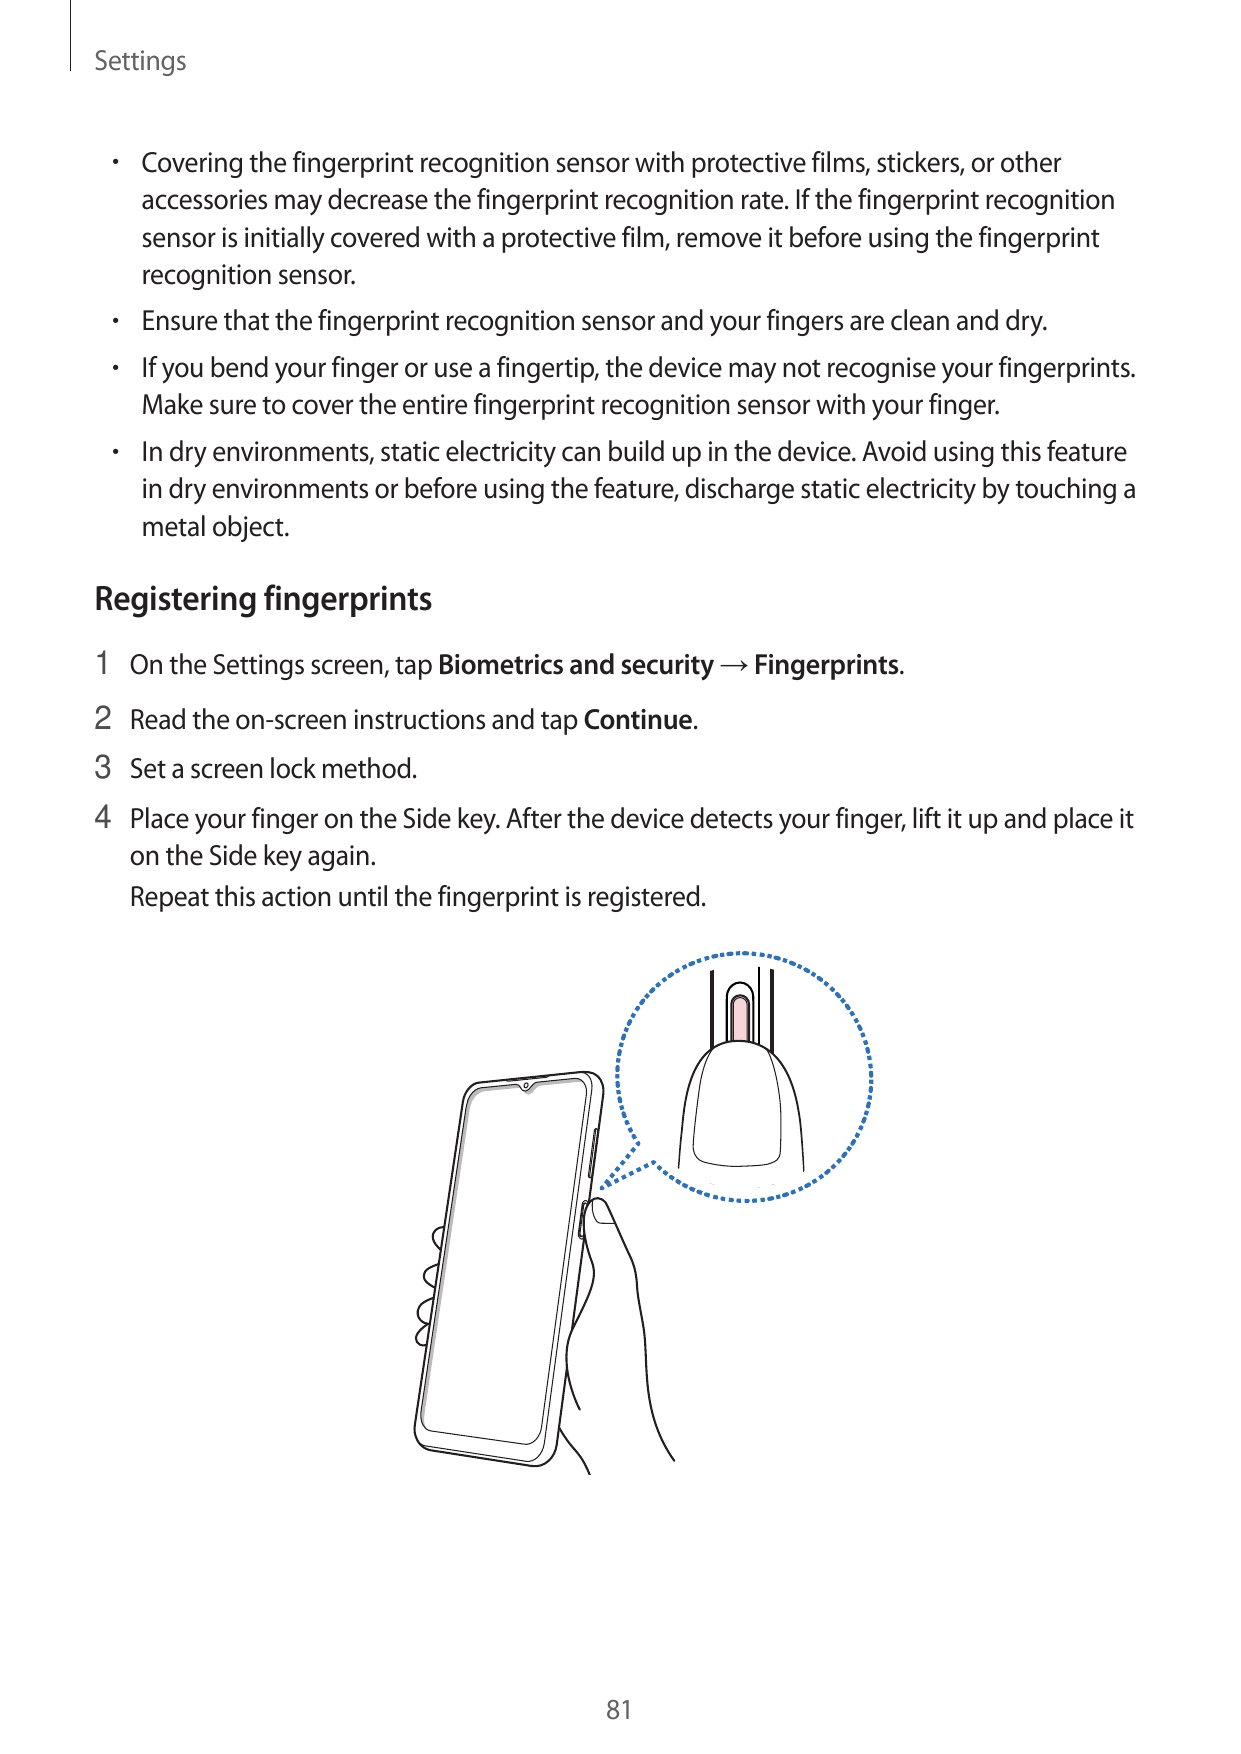 Settings• Covering the fingerprint recognition sensor with protective films, stickers, or otheraccessories may decrease the fing